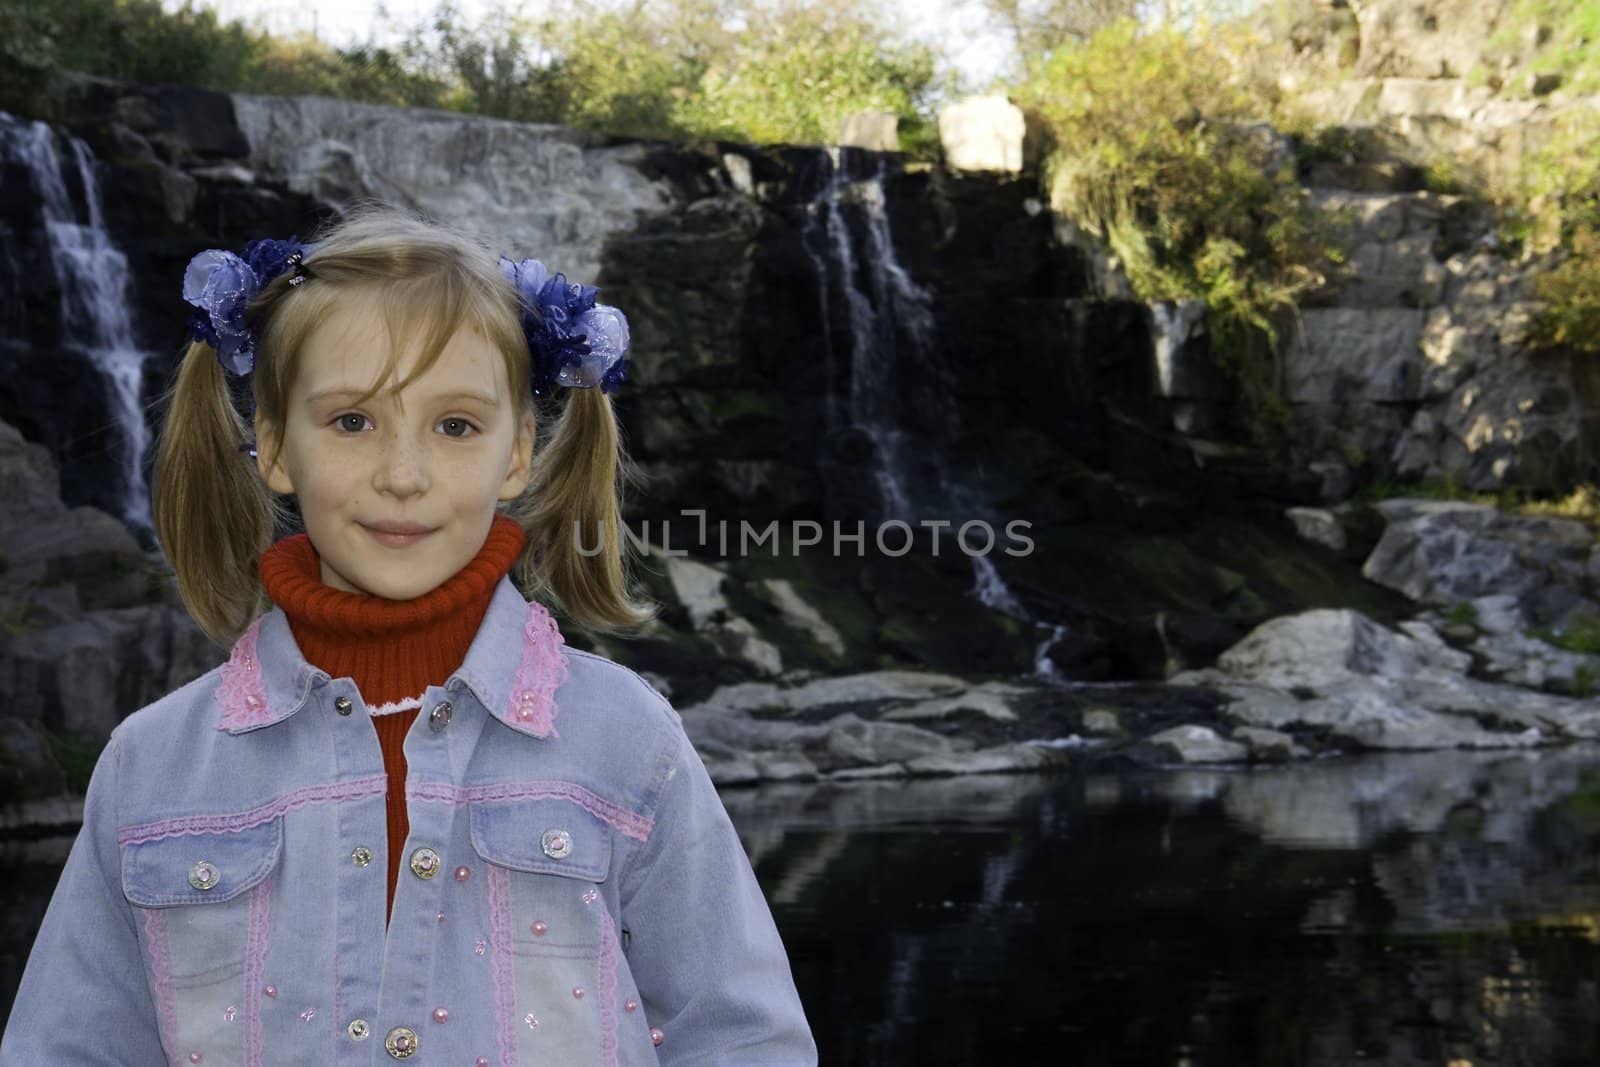 The girl and a waterfall by Sergey_Shulgin